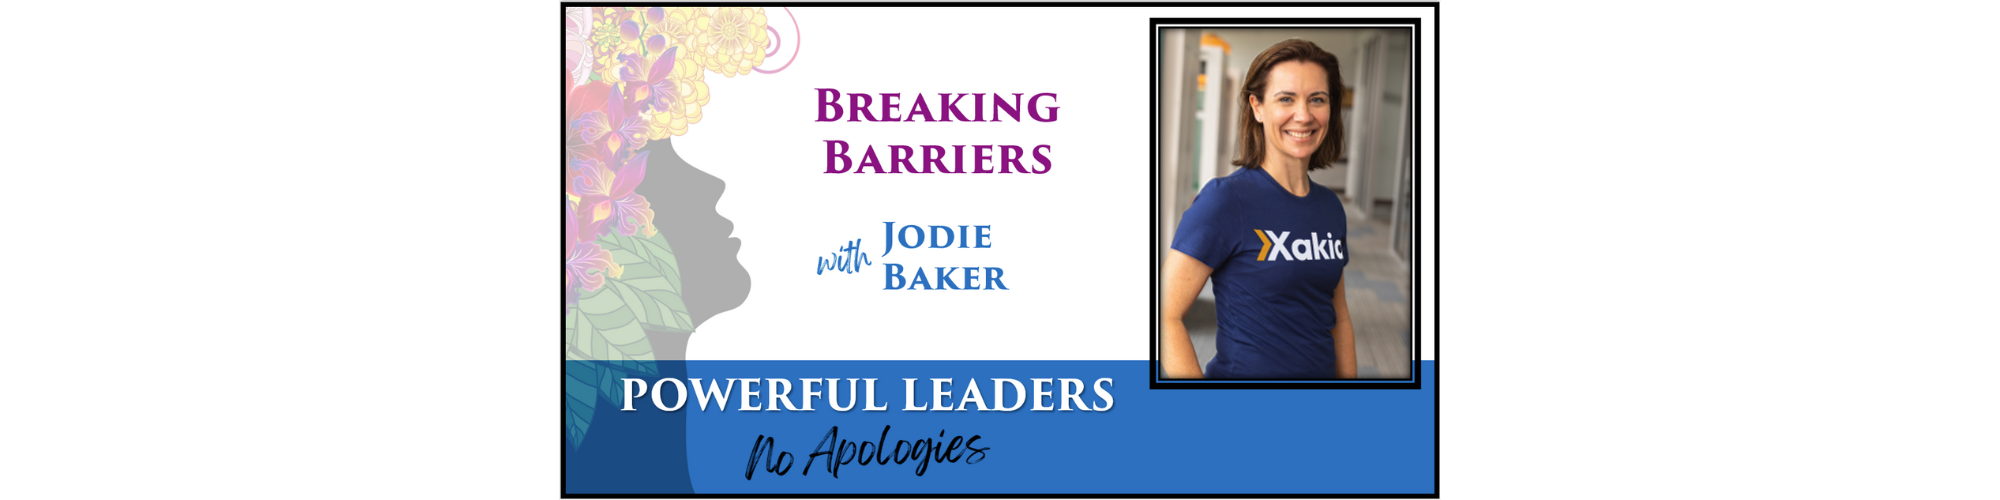 Powerful Leaders, No Apologies Episode #14 with Jodie Baker Podcast Banner